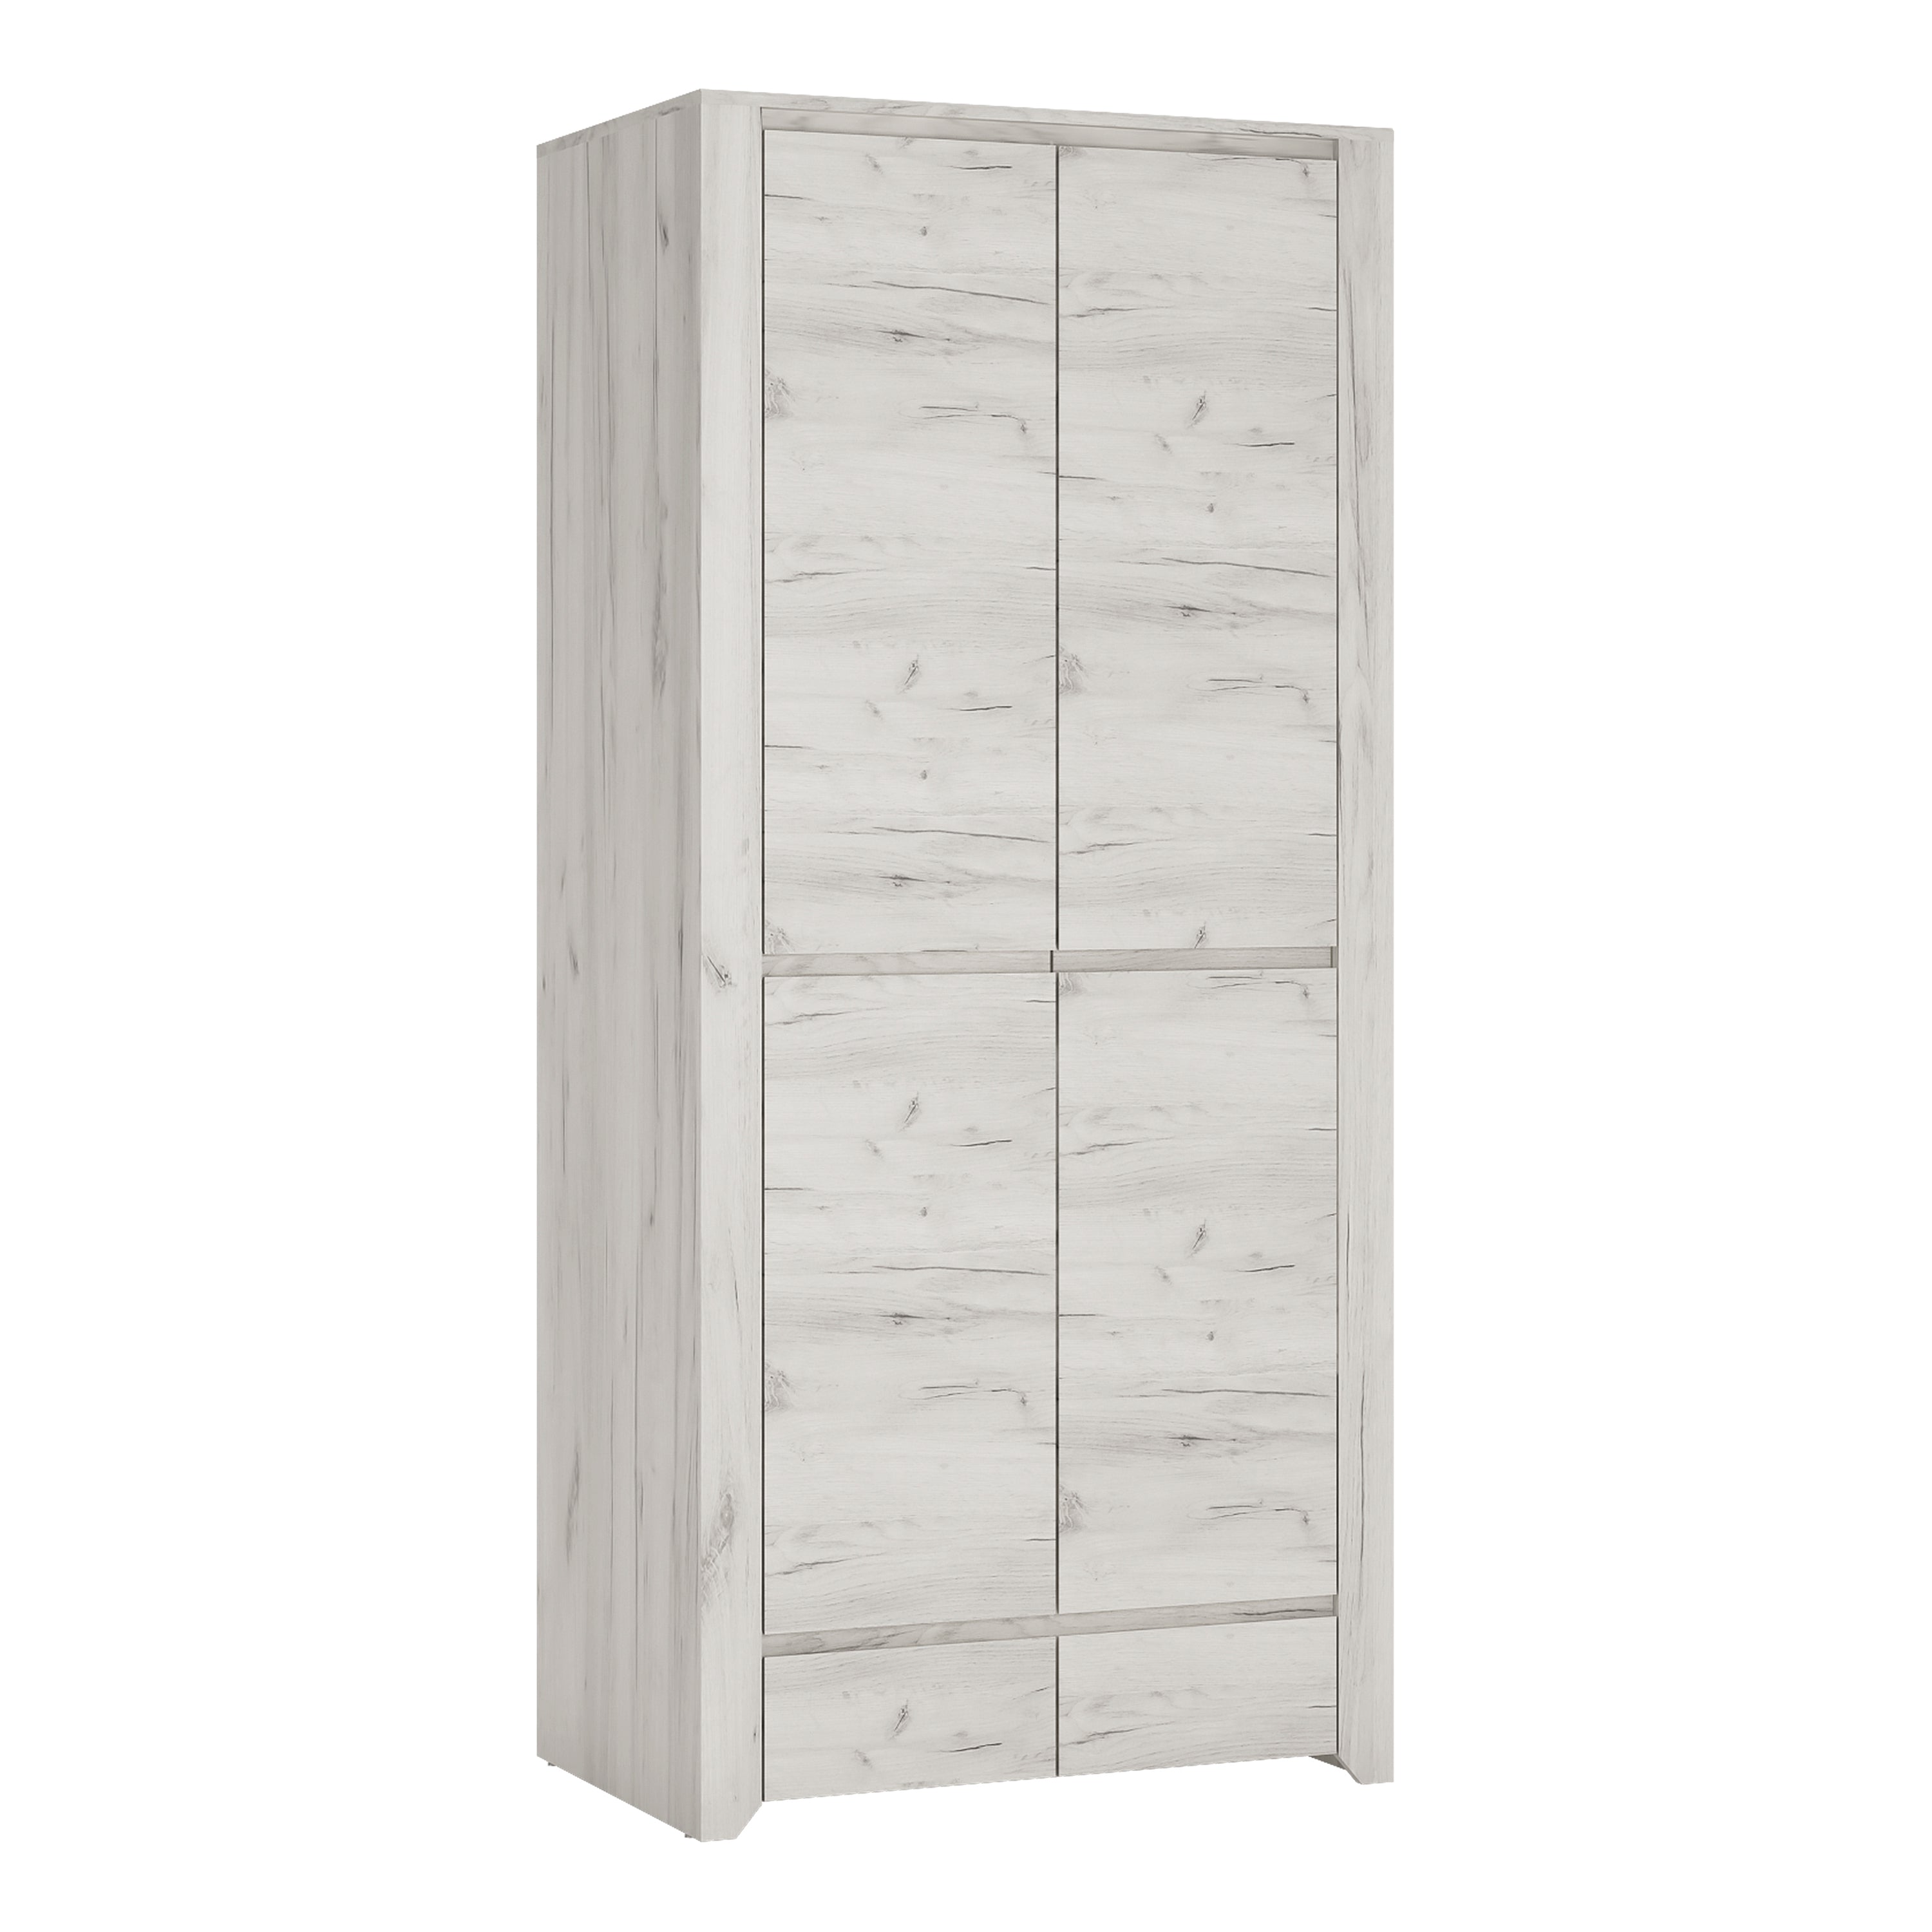 Image of Angel 2 Door 2 Drawer Fitted Wardrobe